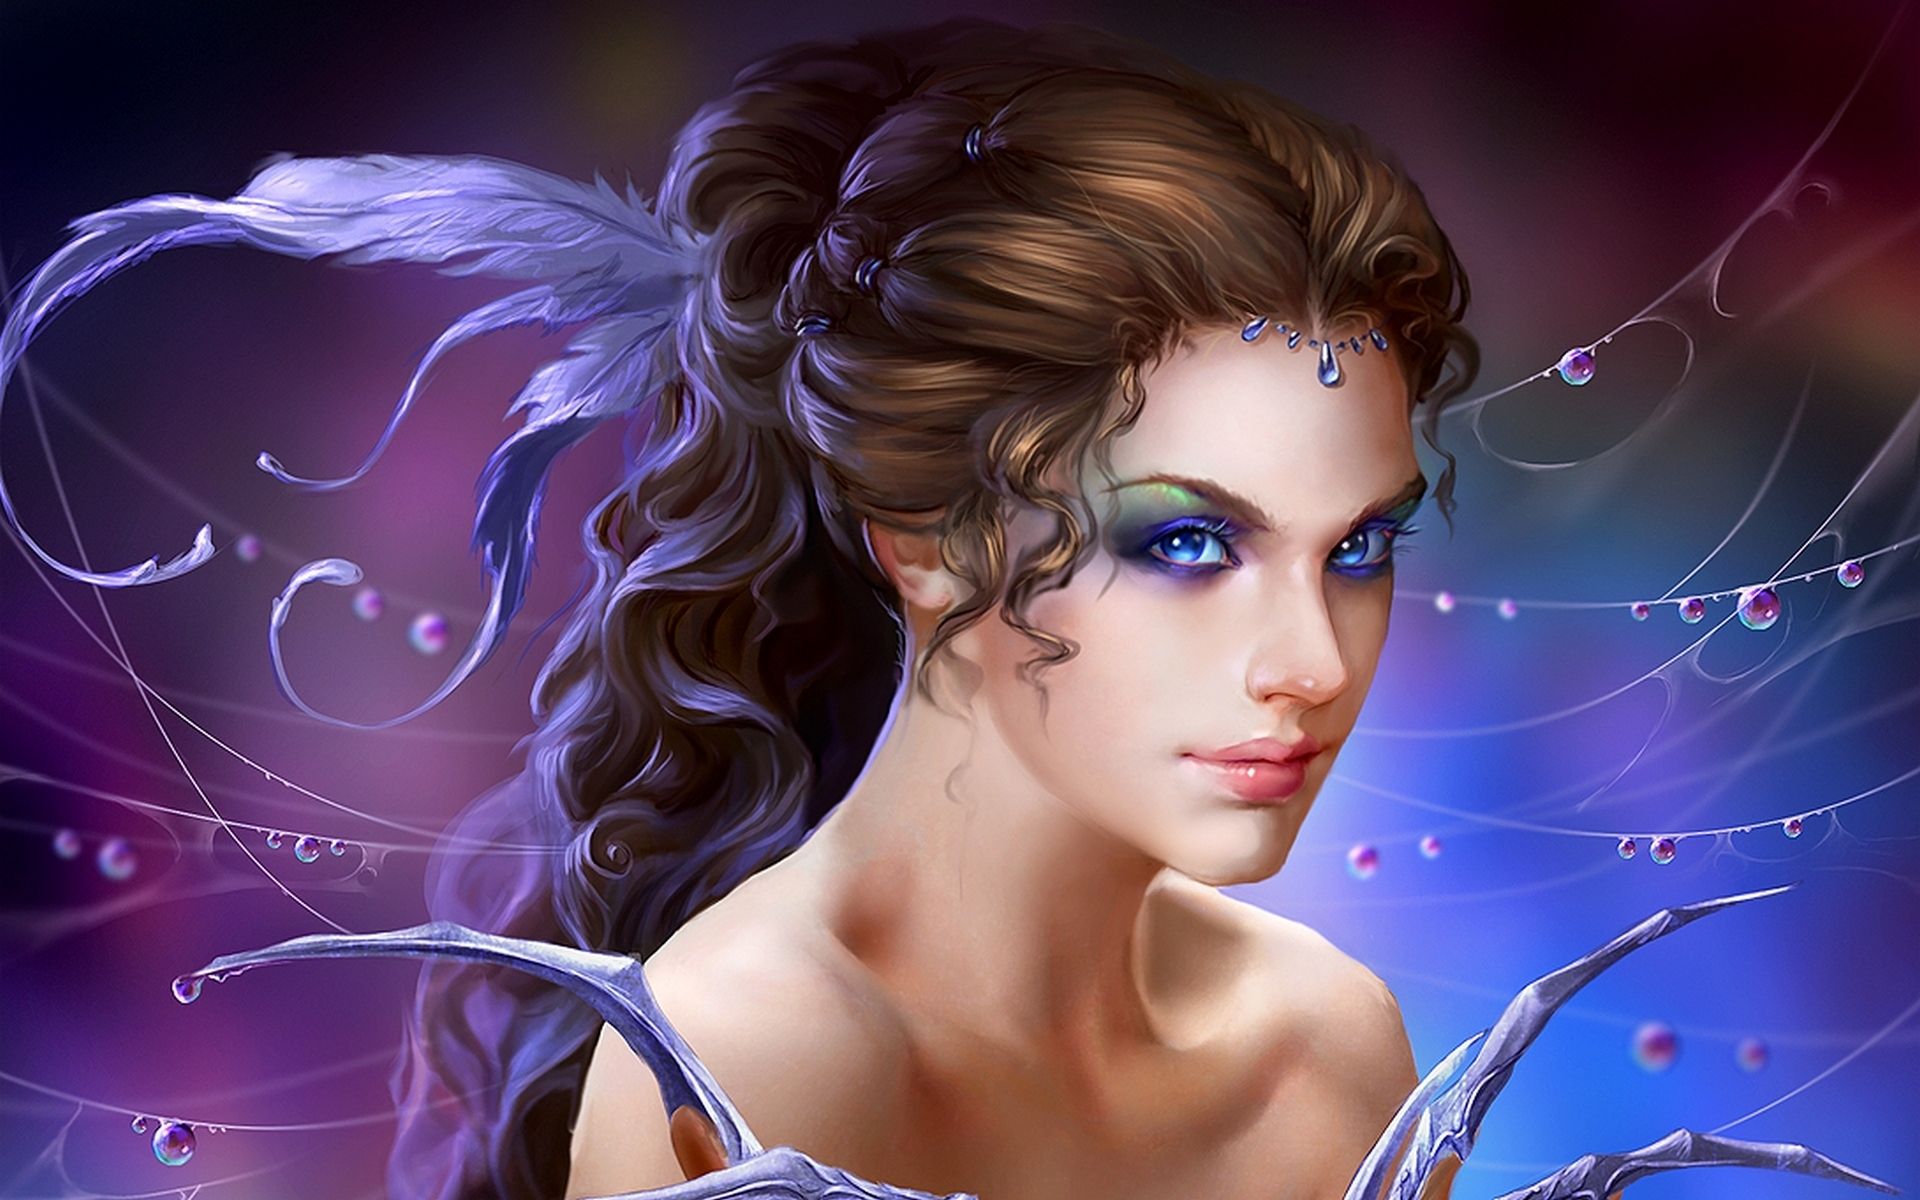 girl wallpapers free,hair,face,cg artwork,beauty,hairstyle